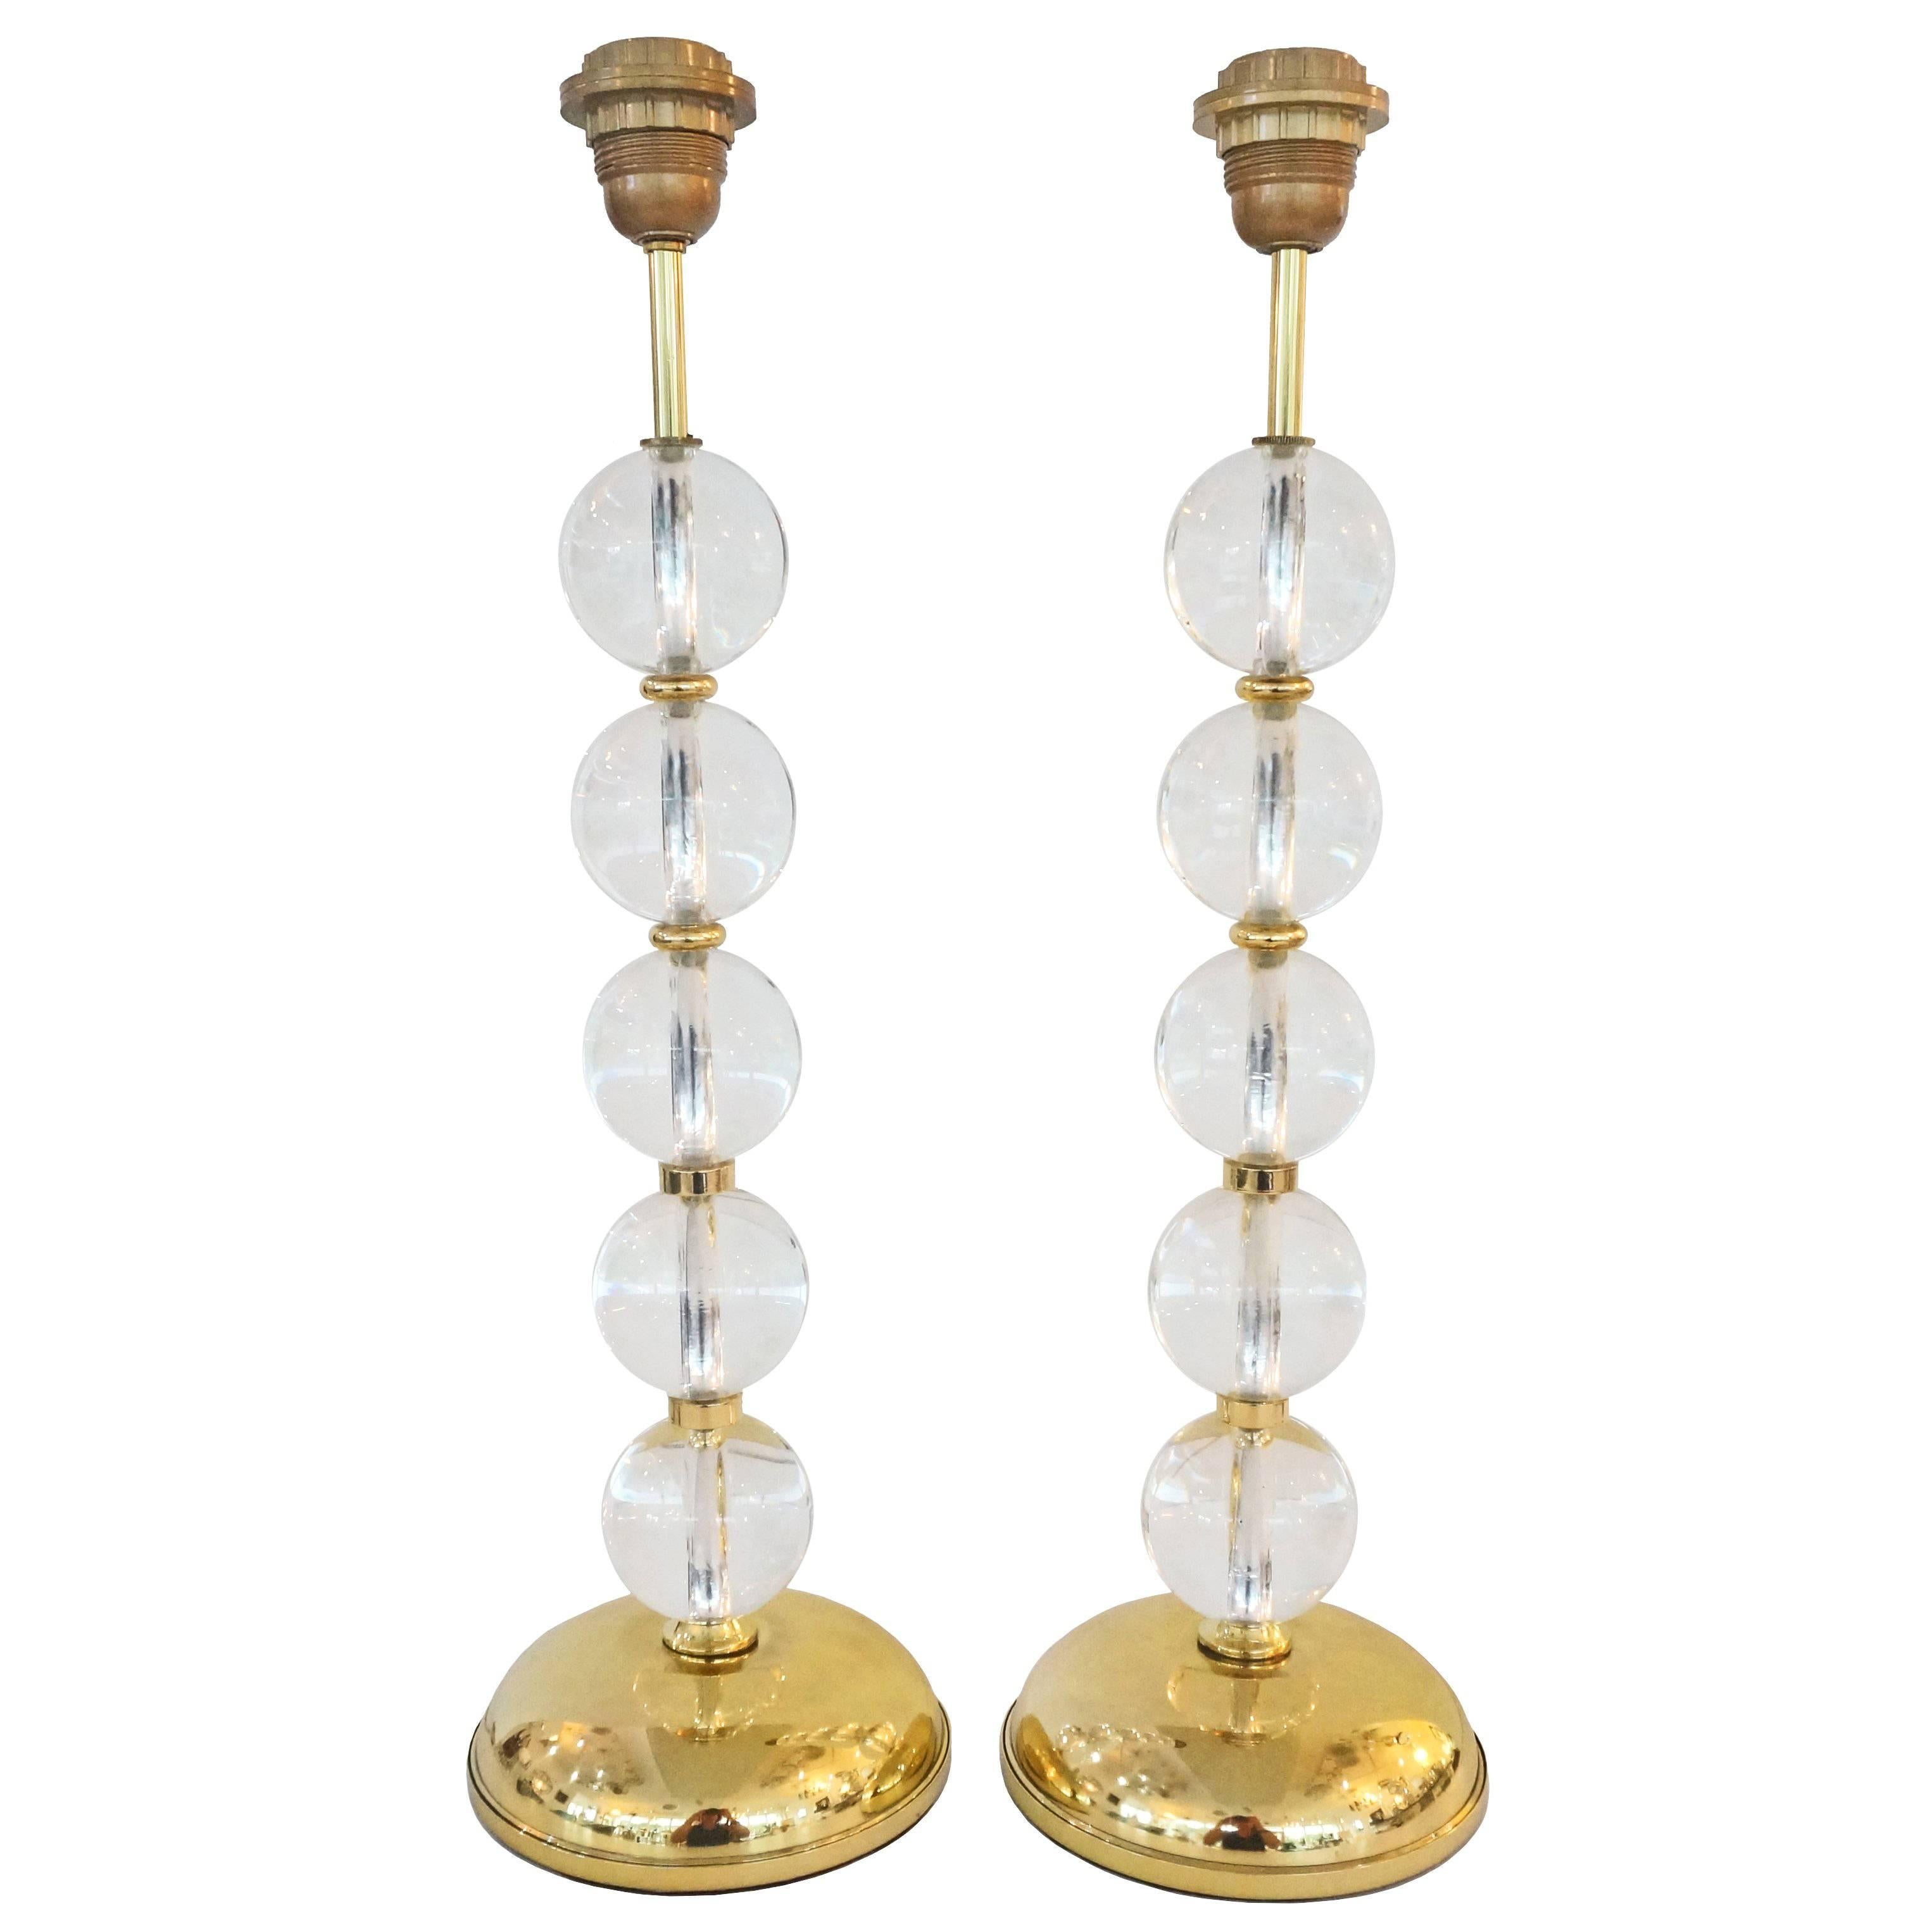 Pair of Art Deco Table Lamps in Brass with Clear Crystal Spheres